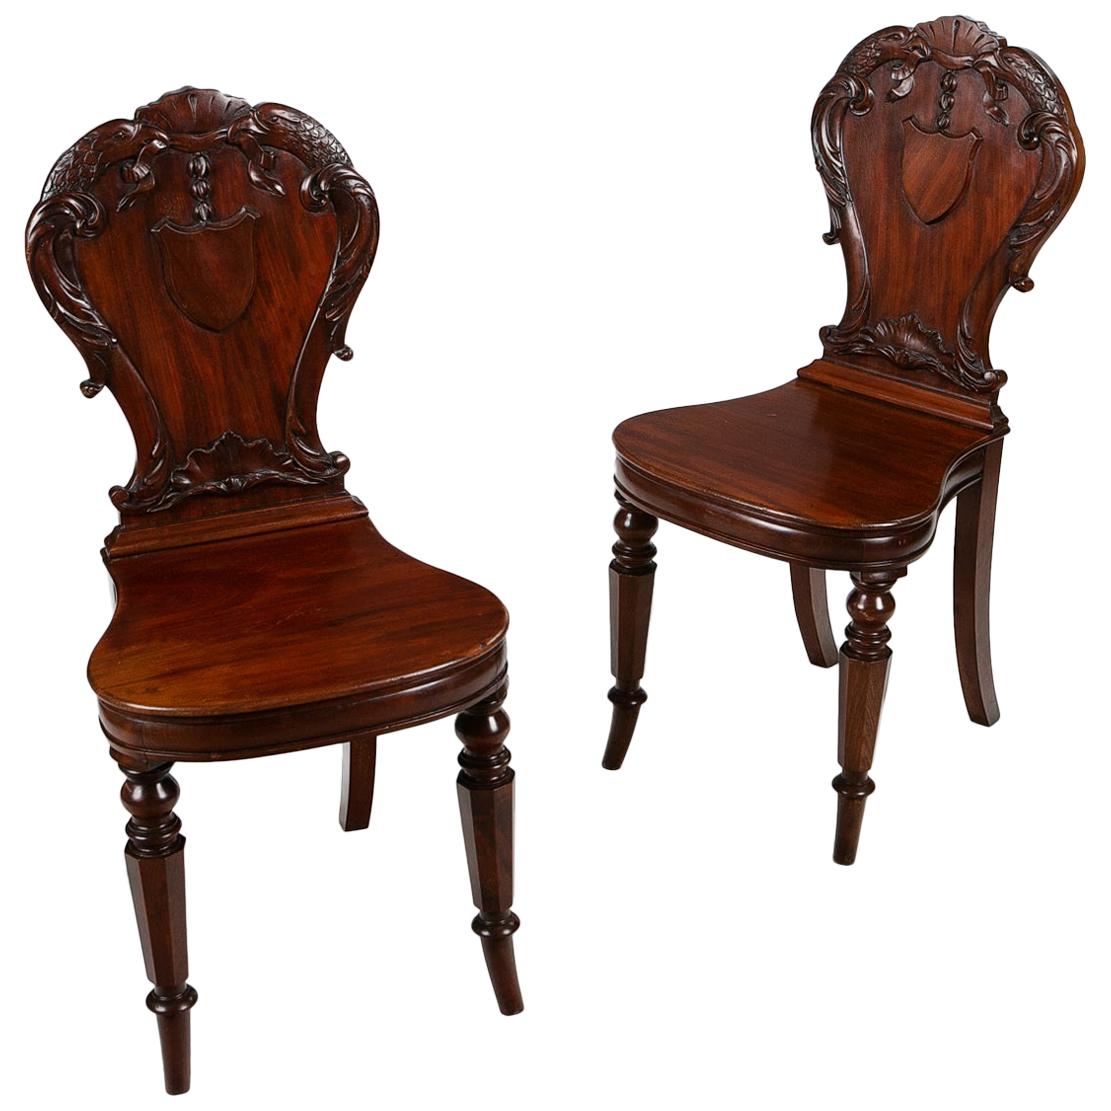 Early 19th Century Regency Pair of Hall Chairs by Gillows of Lancaster & London